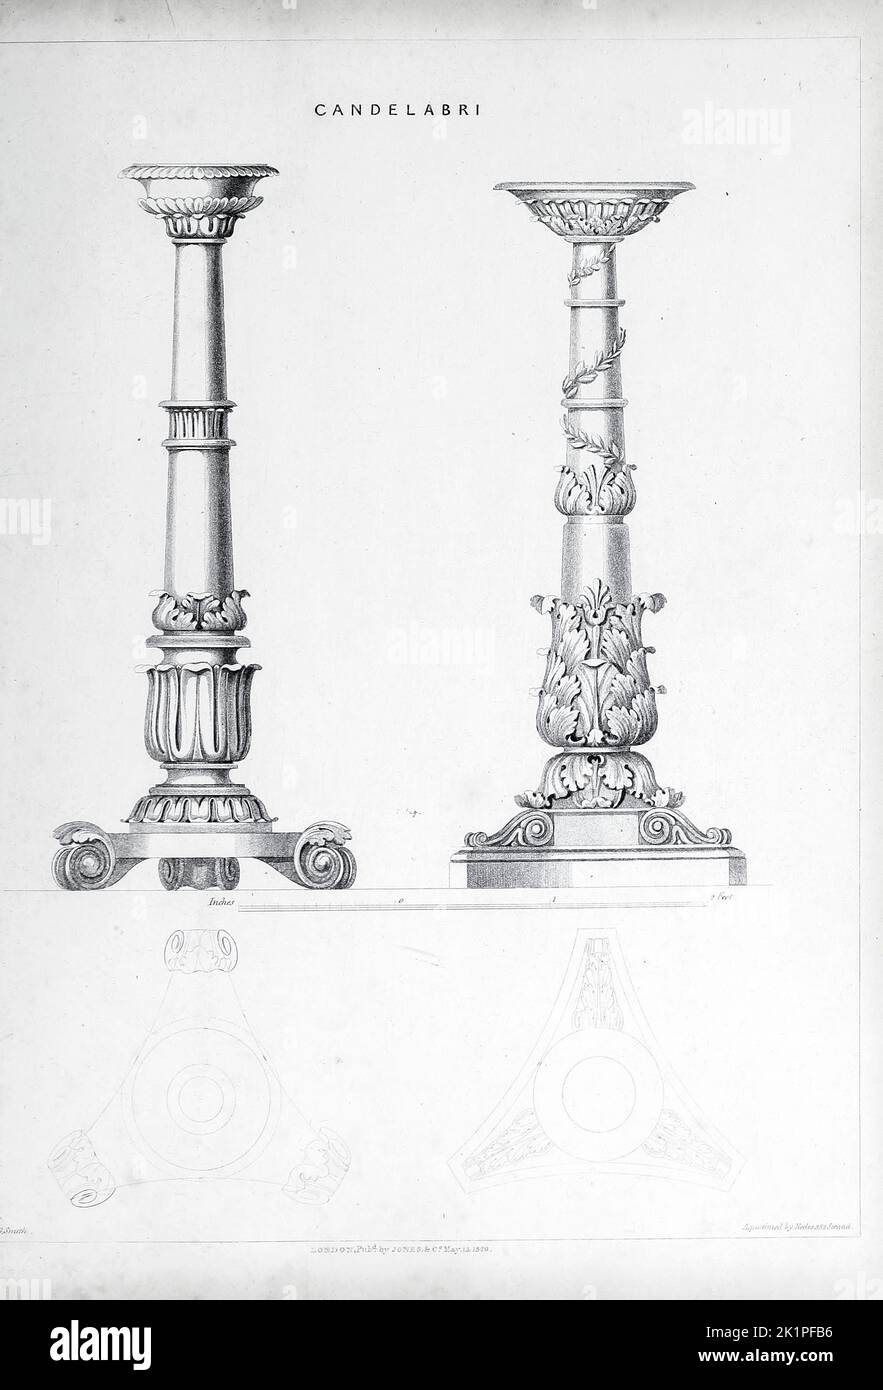 candelabra, from the The cabinet-maker and upholsterer's guide : being a complete drawing book, in which will be comprised treatises on geometry and perspective as applicable to the above branches of mechanics illustrated by numerous engravings of new and original designs for household furniture, and interior decoration beautifully and correctly coloured By Smith, George, 1808-1899 Publication date 1826 Publisher London : Jones and Co. Stock Photo